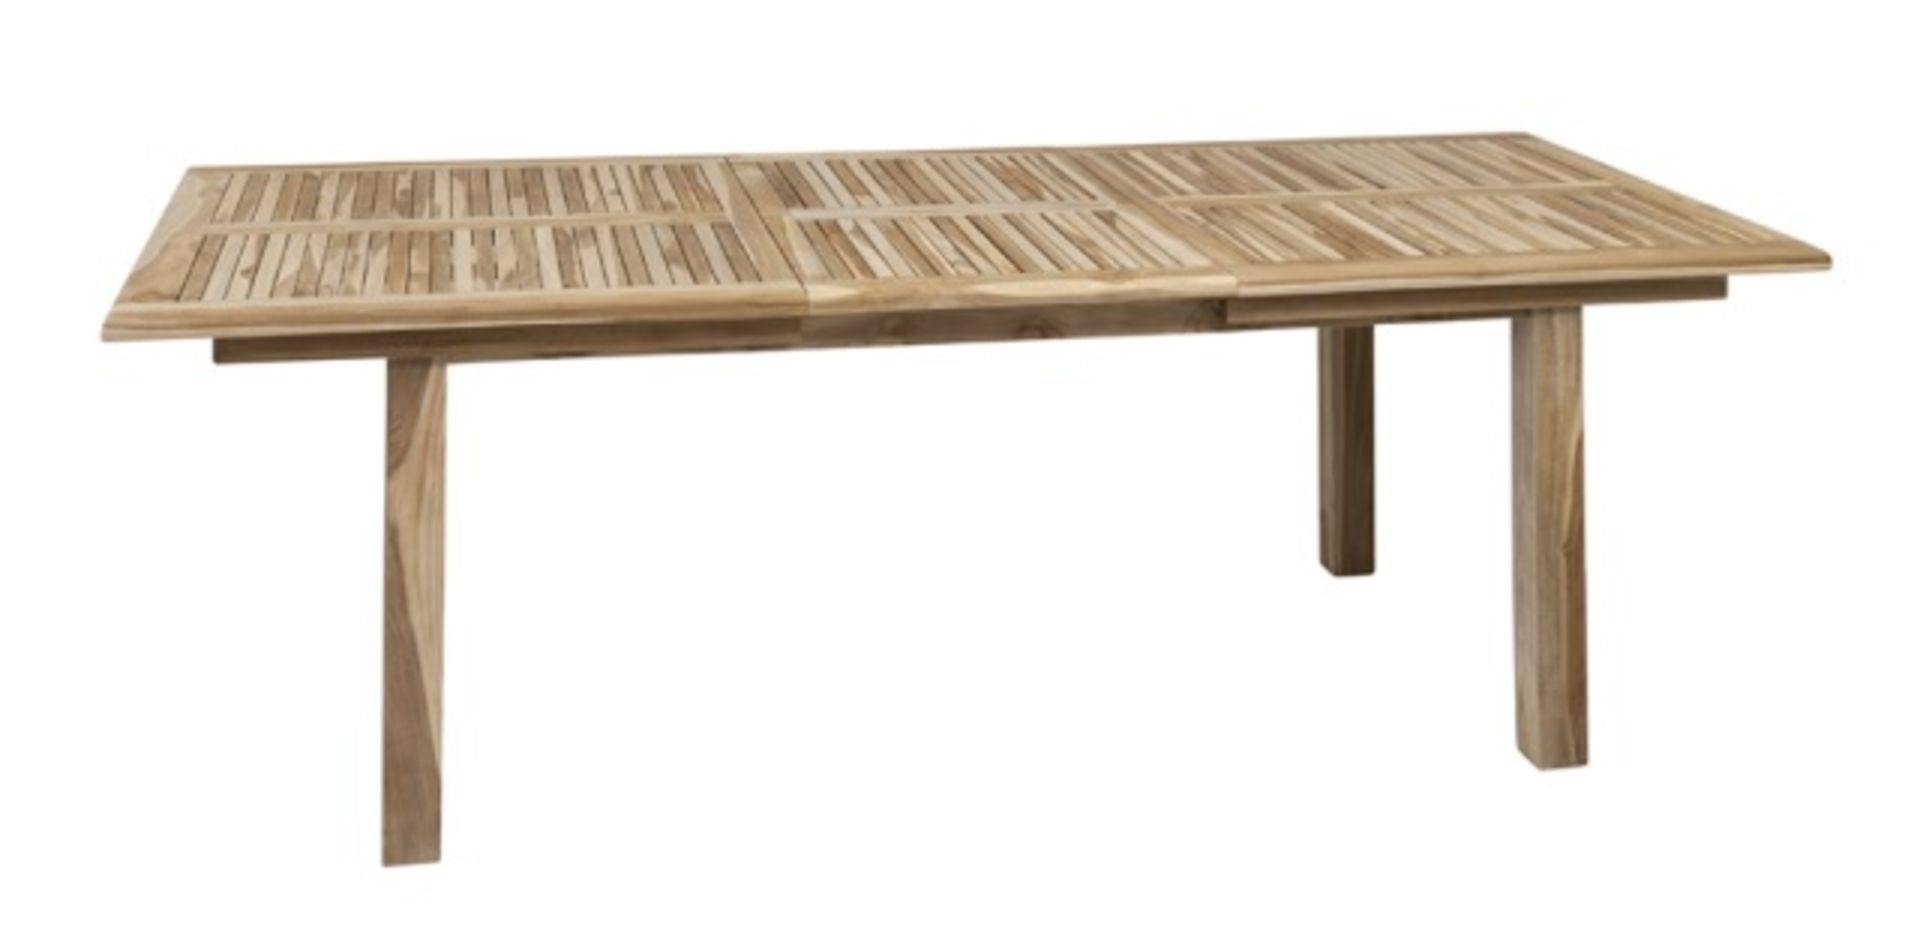 Teak Community Table 39" X 71" - 95". KT-40, with legs, one per box, 13 total. - Image 2 of 8